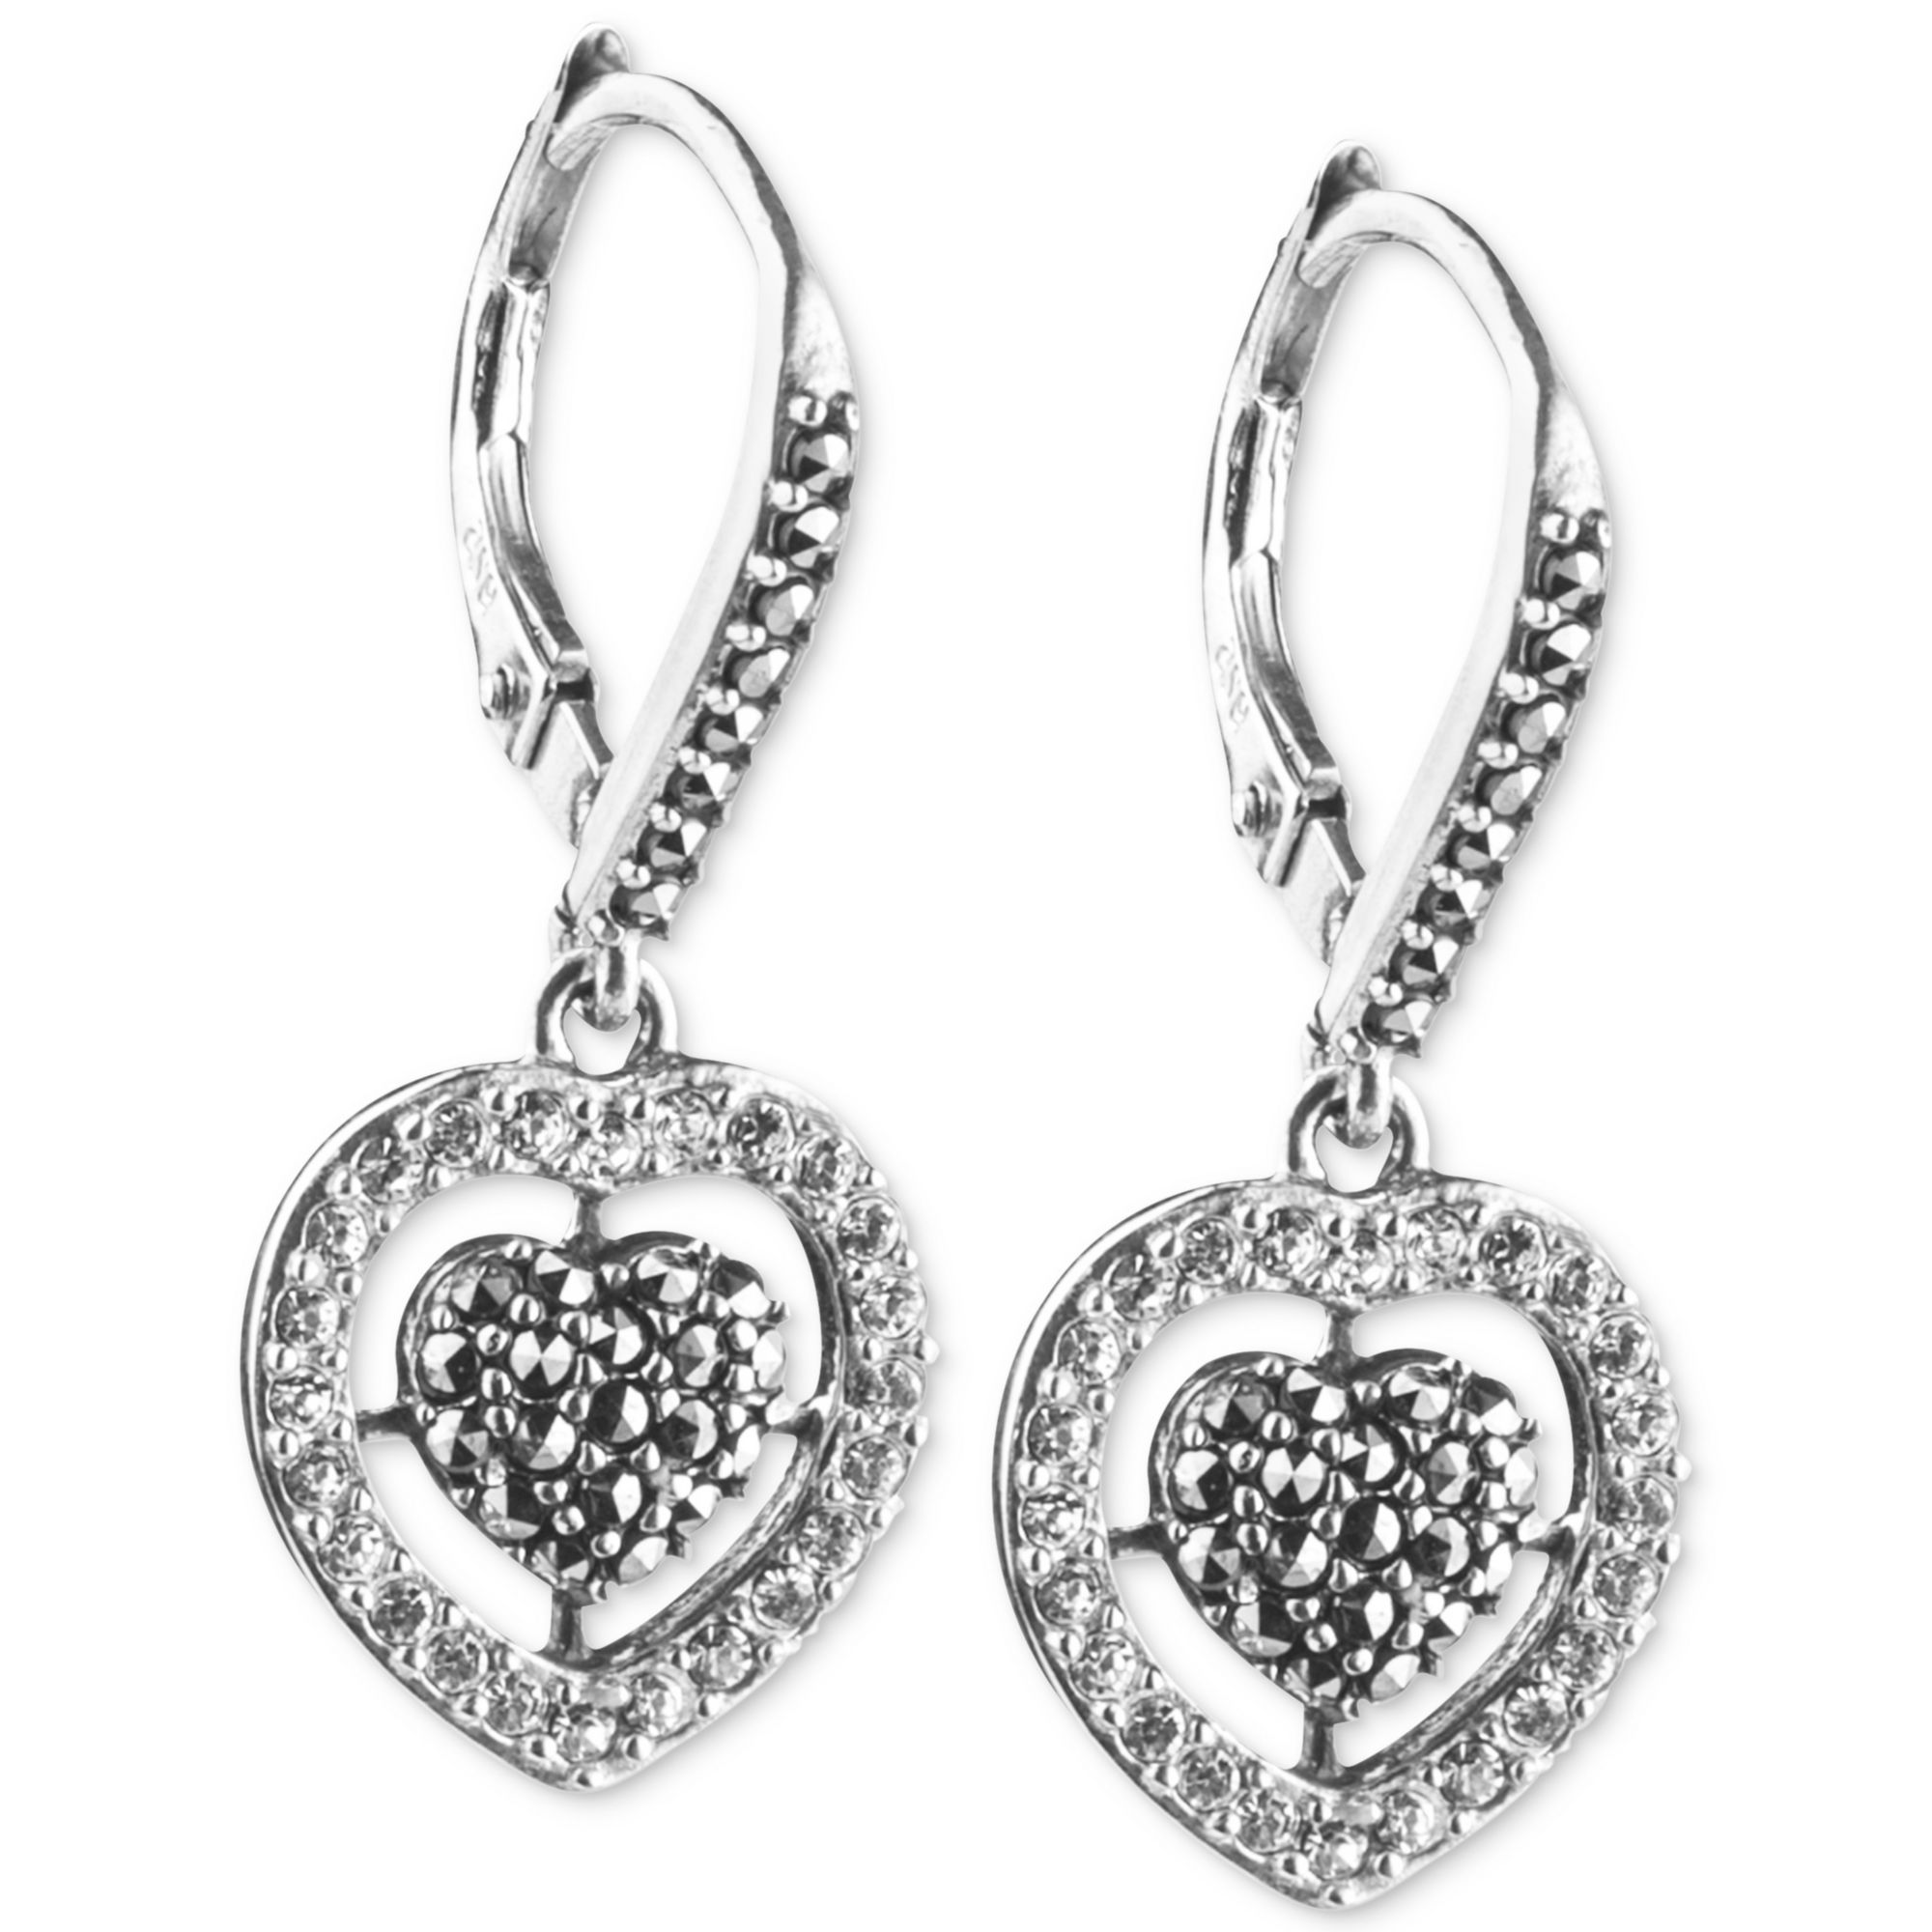 Judith Jack Sterling Silver Crystal and Marcasite Heart Drop Earrings